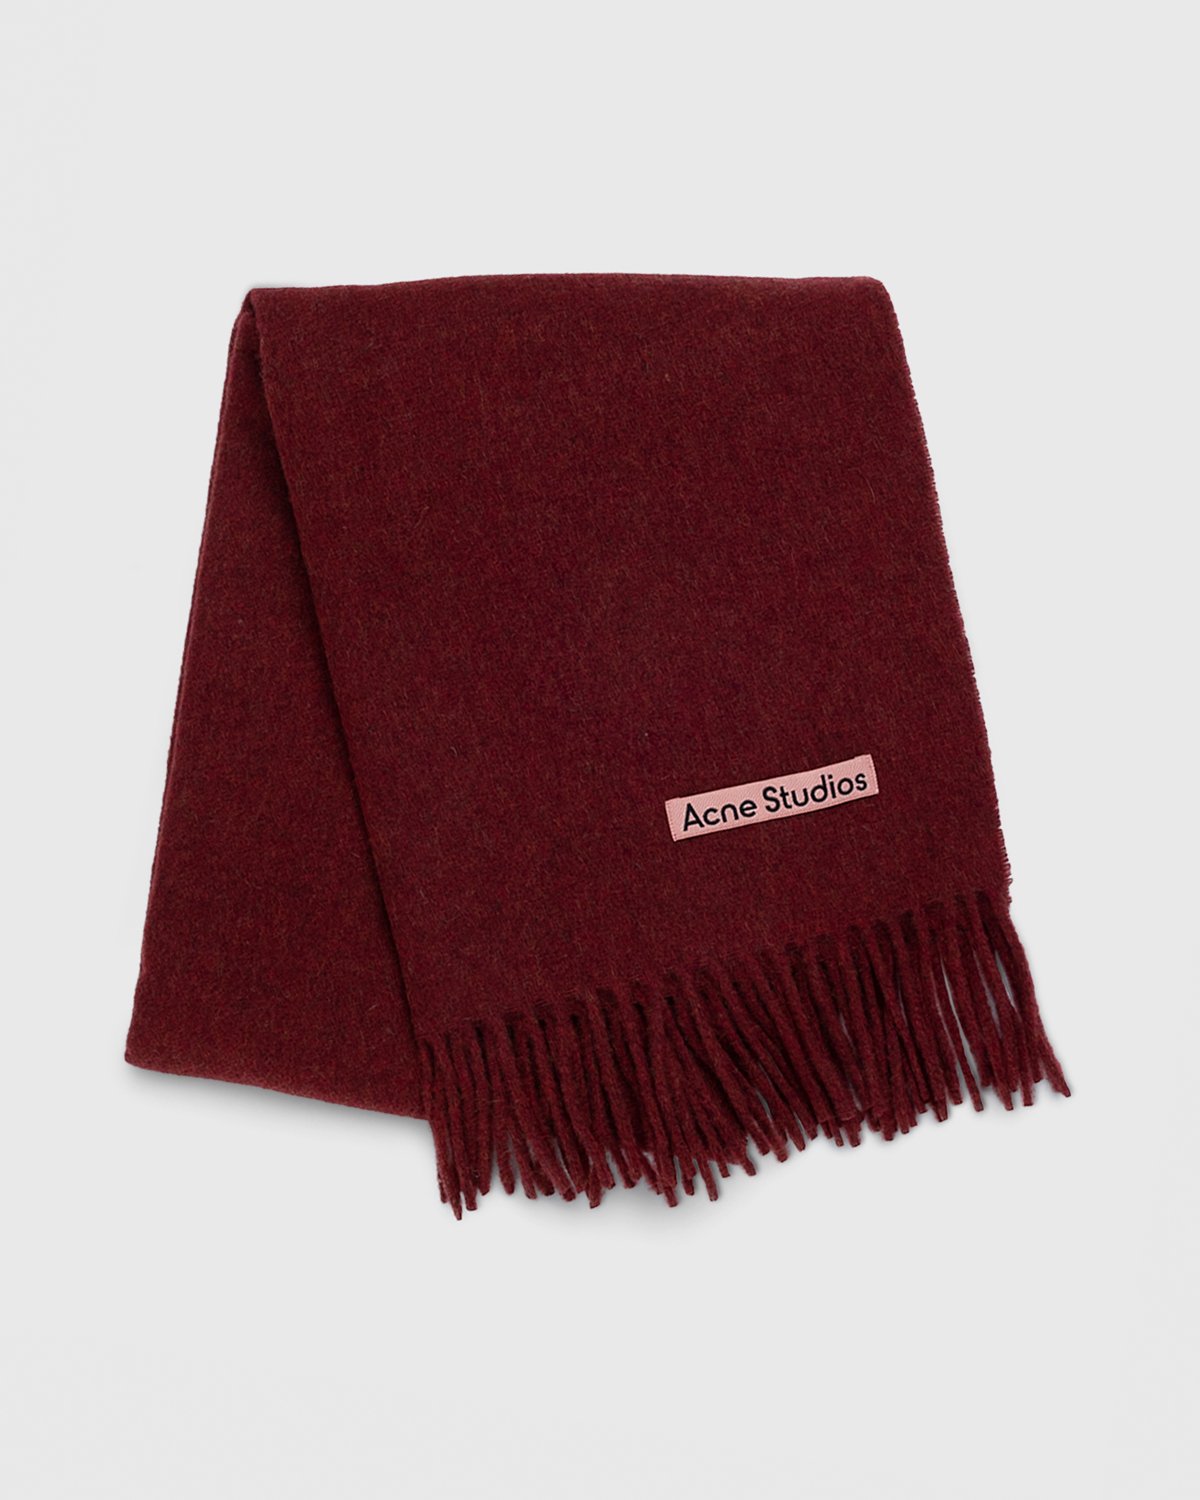 Acne Studios - Canada Narrow Scarf Red Melange - Accessories - Red - Image 1